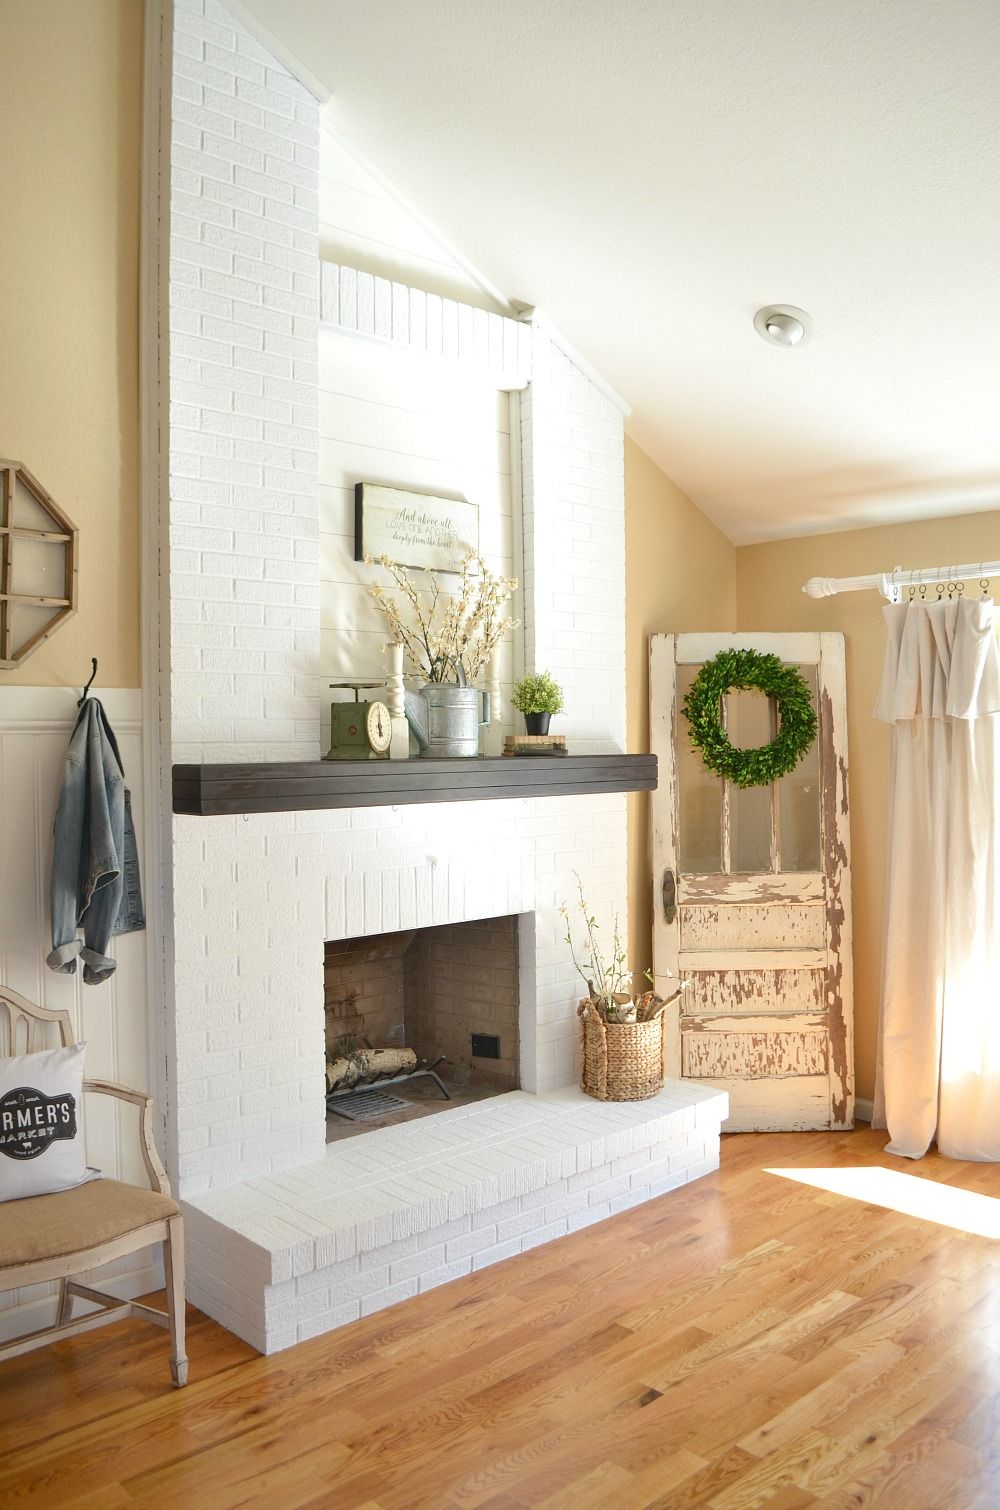 Fireplace Insert Paint Beautiful How to Paint A Brick Fireplace for the Home